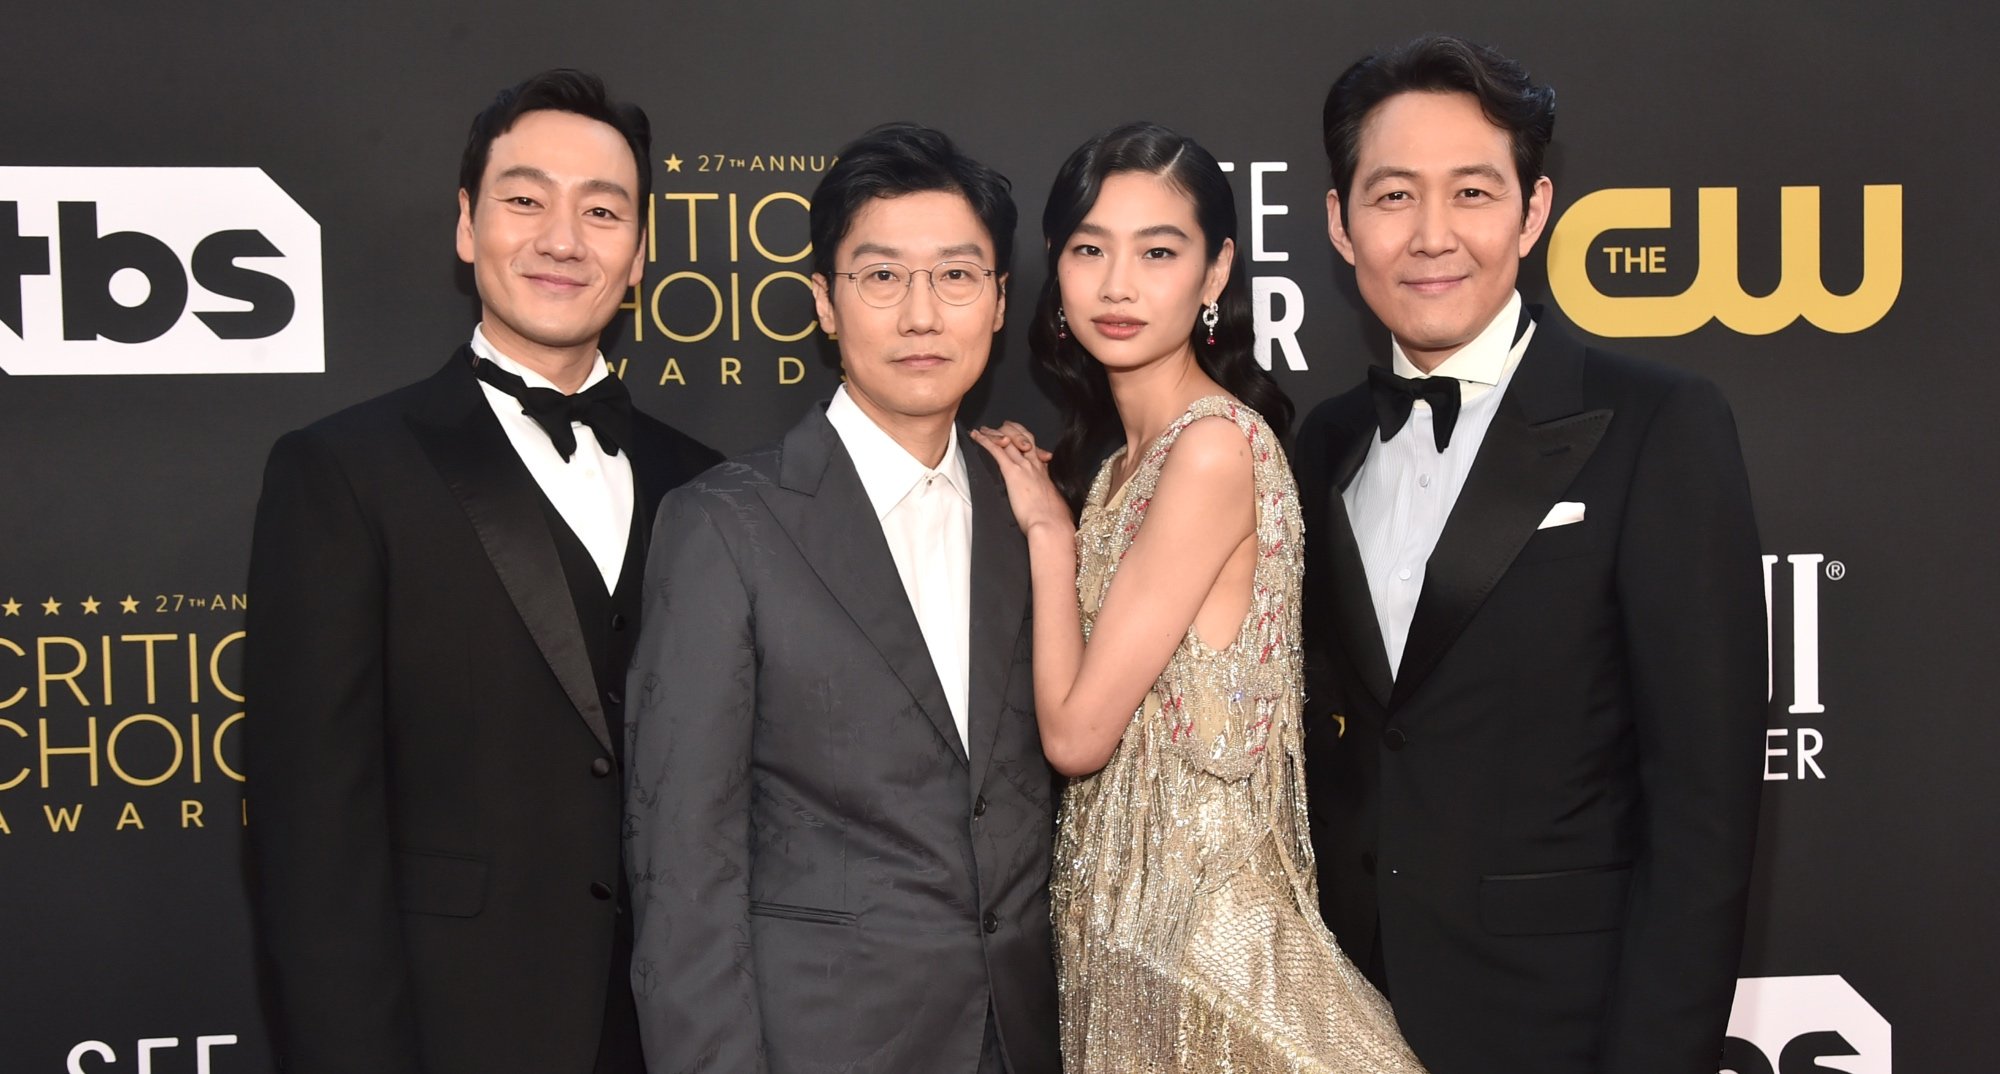 Hwang Dong-hyuk and cast of 'Squid Game' at Critic's Choice Awards in relation to Season 2.